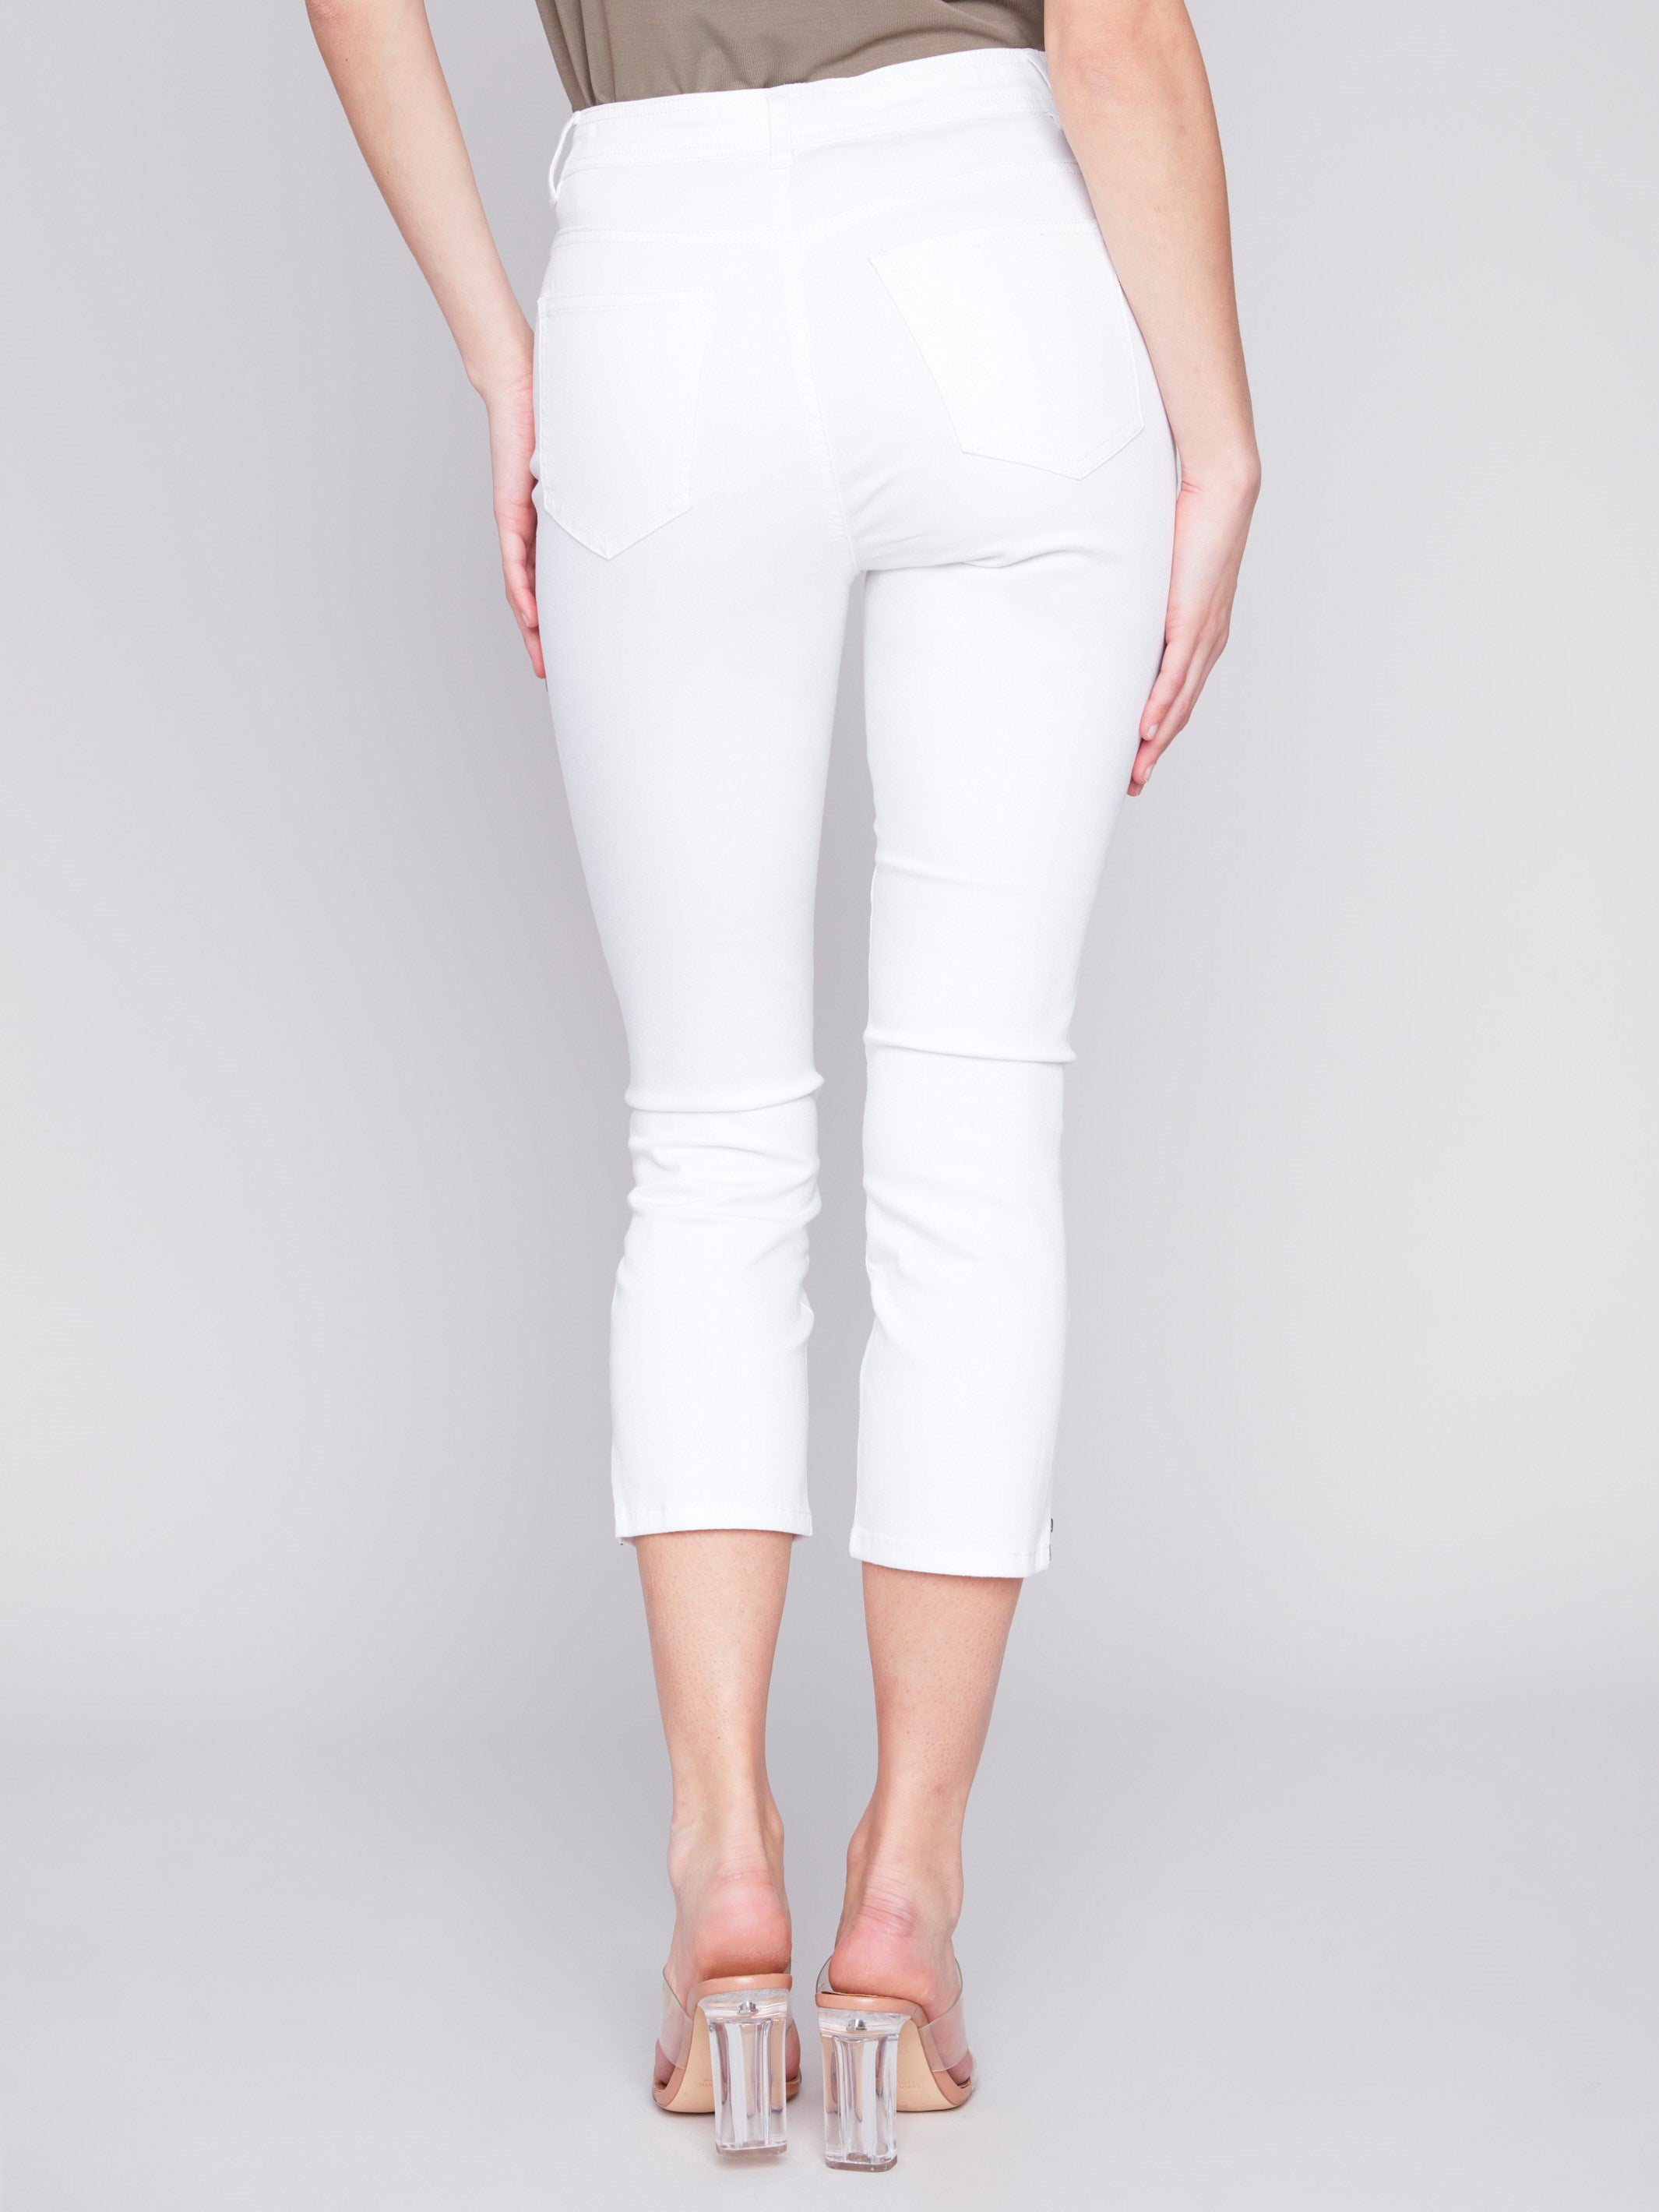 Cropped Twill Pants with Zipper Detail - White - Charlie B Collection Canada - Image 3